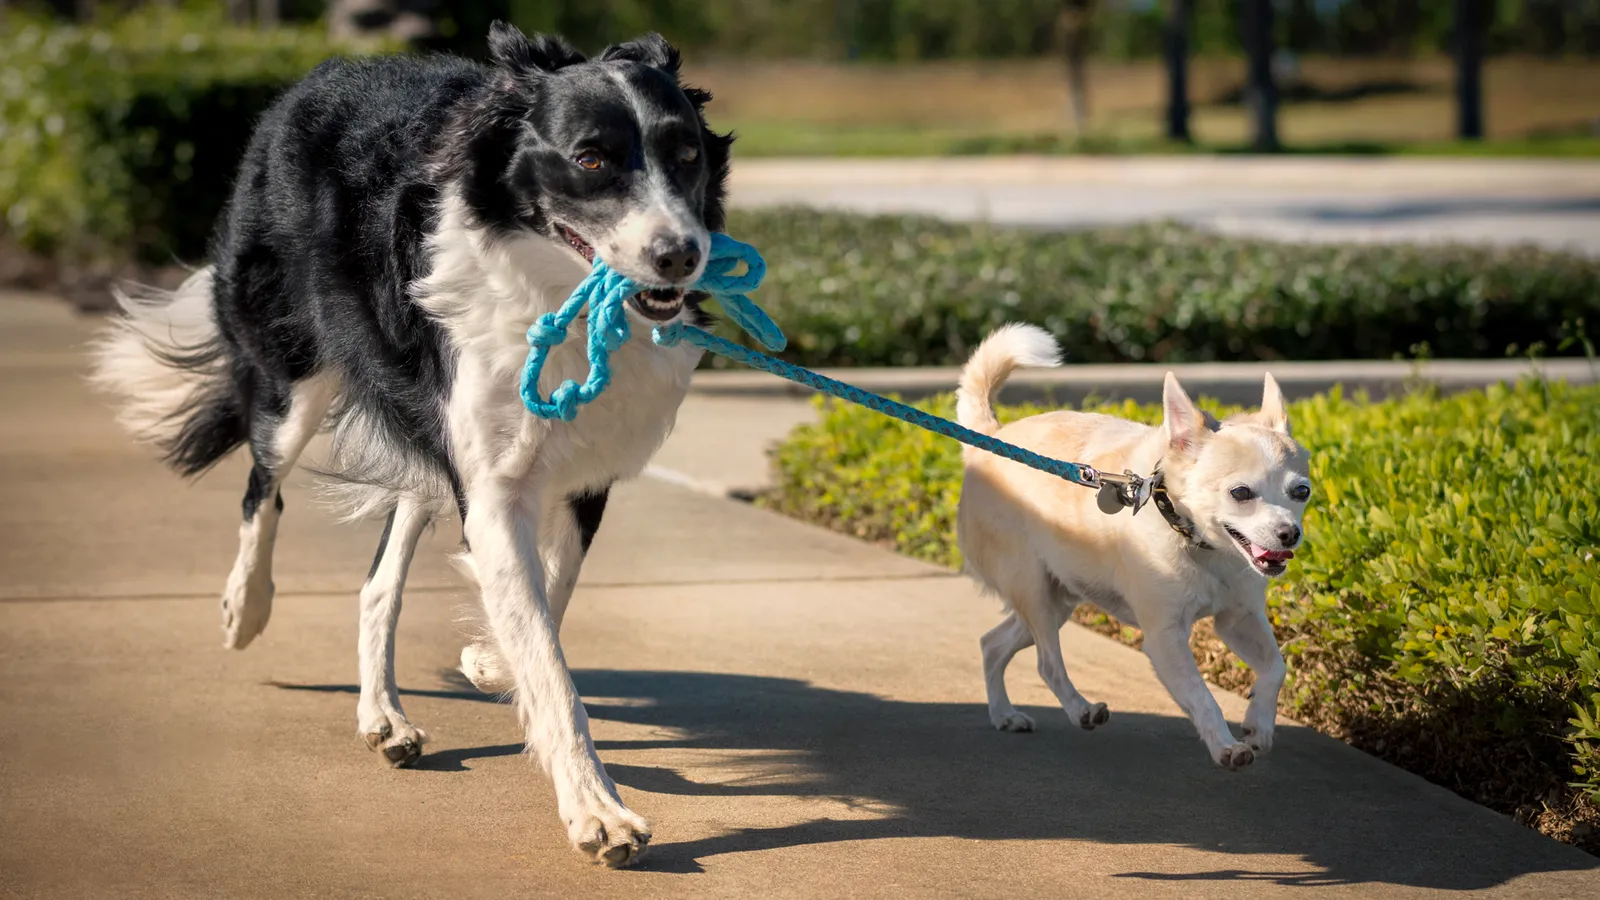 The training that helps your dog lead a better life